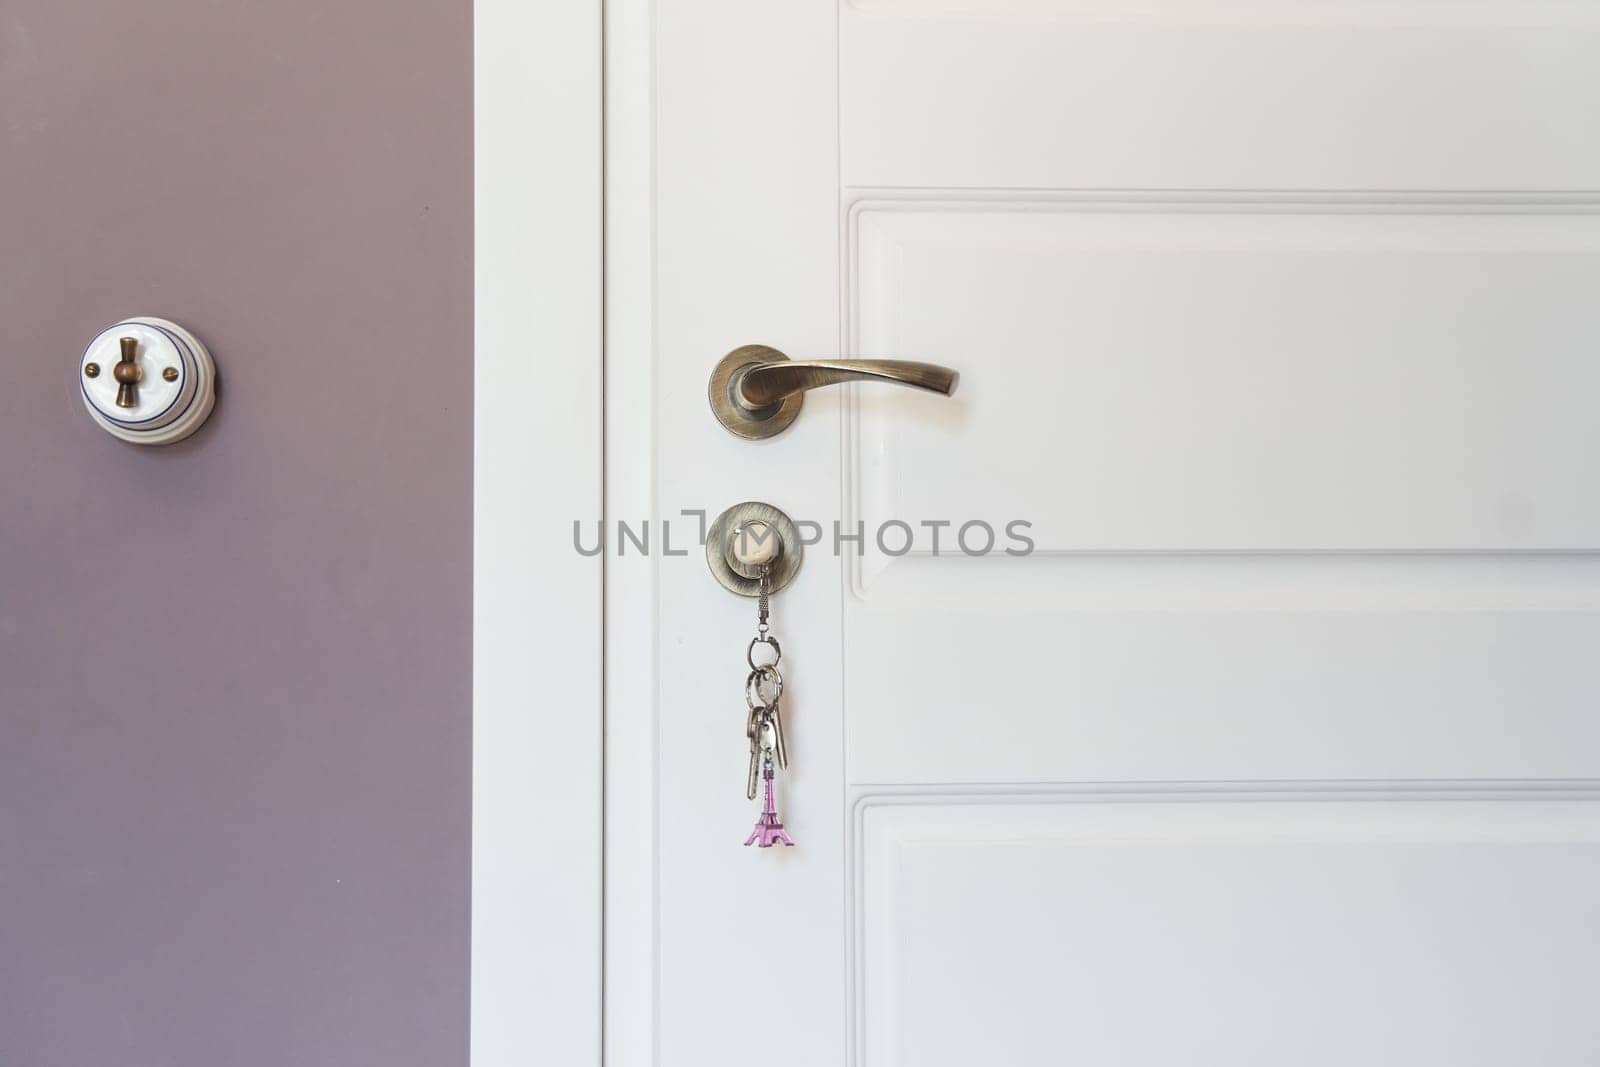 Part of white modern interior door with key in lock and metal handle by driver-s